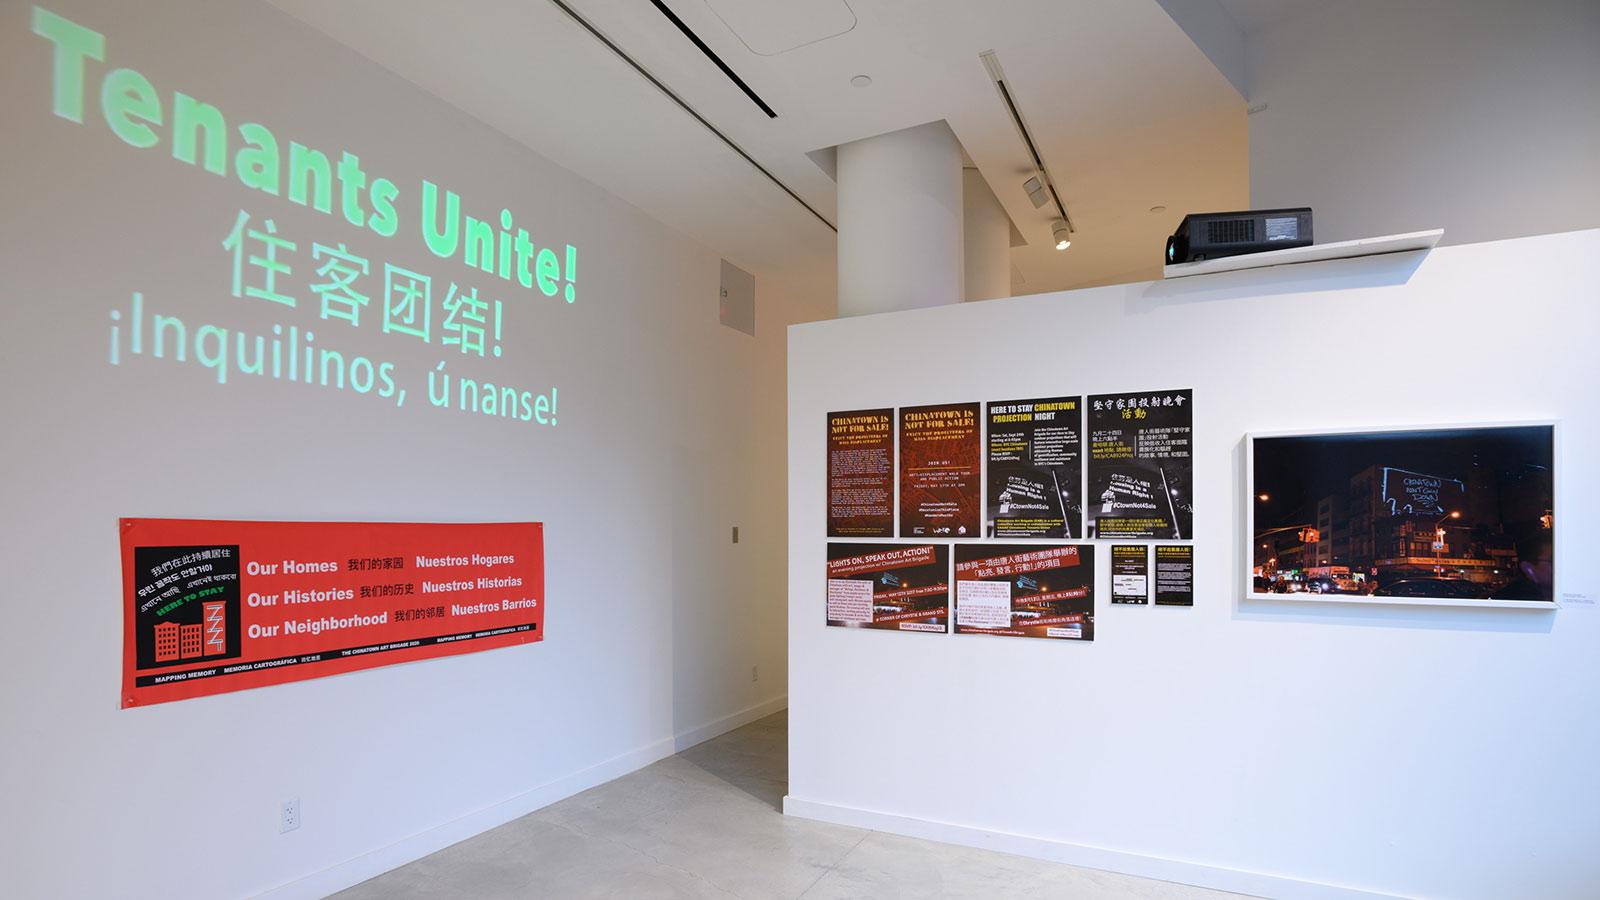 Artwork on display by the Chinatown Art Brigade in the "Degentrification Archives" exhibition at the Pace University Art Gallery.